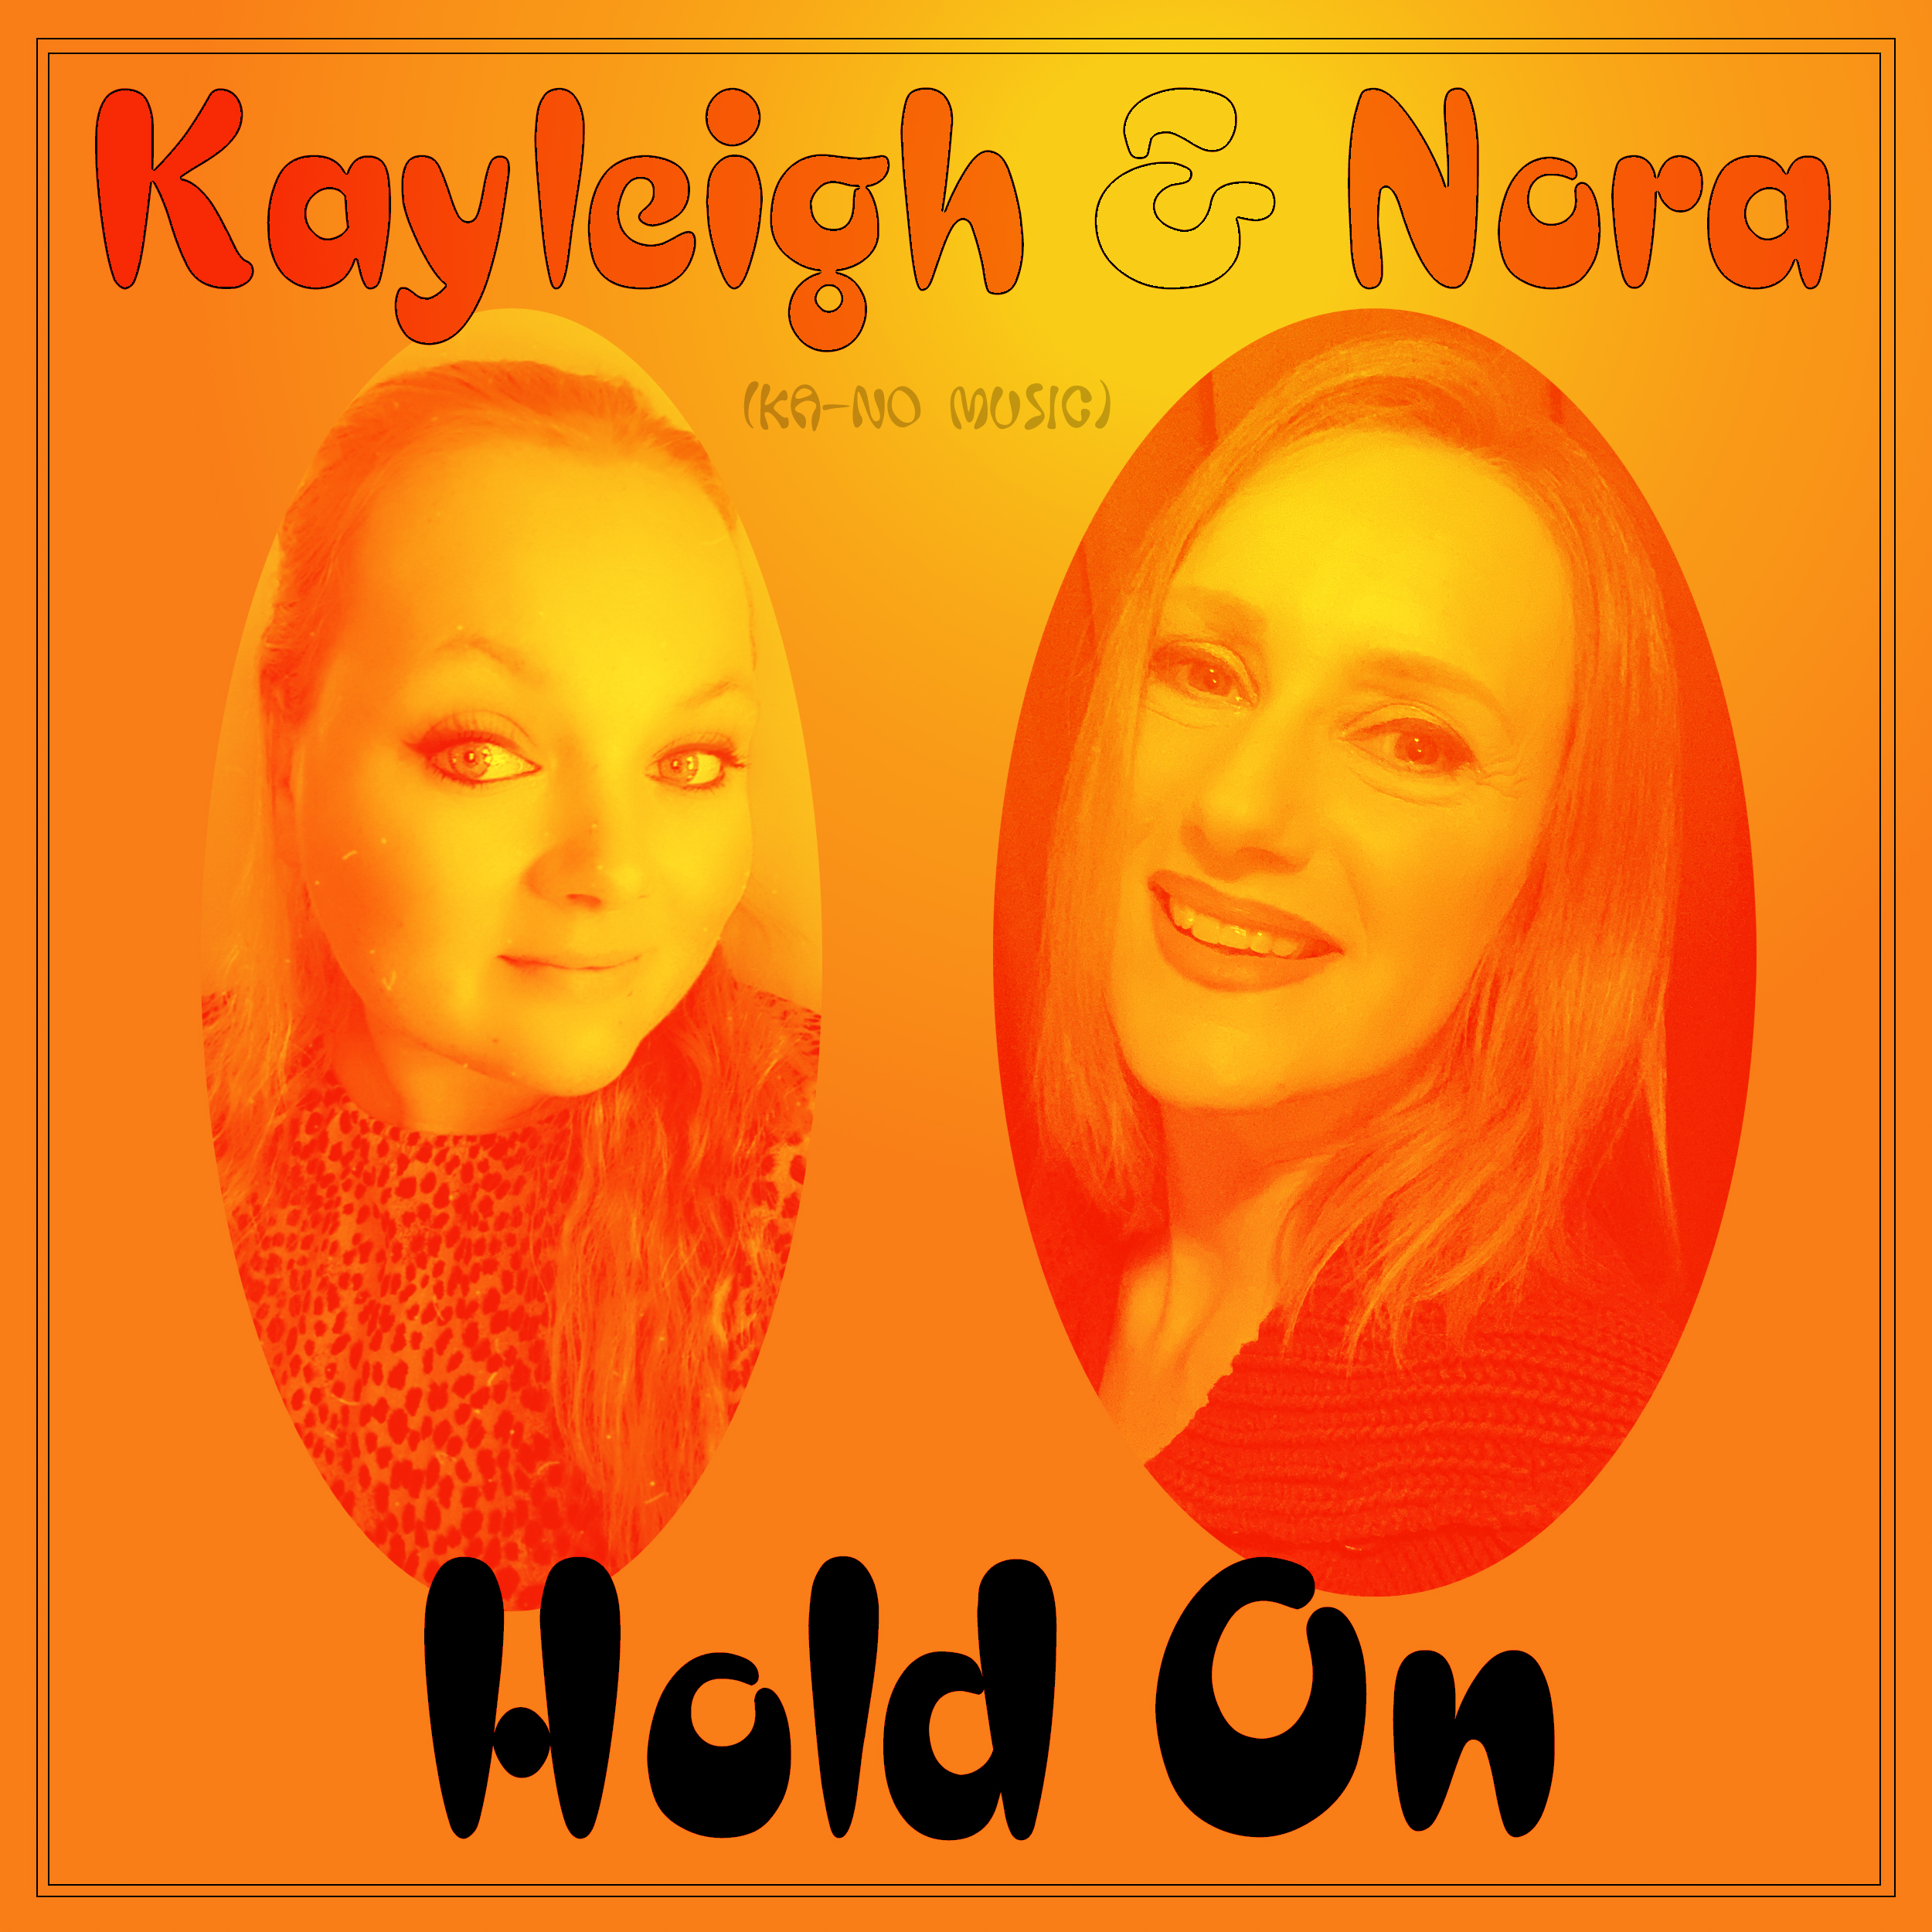 Hold On (Kayleigh featuring Nora Tol)